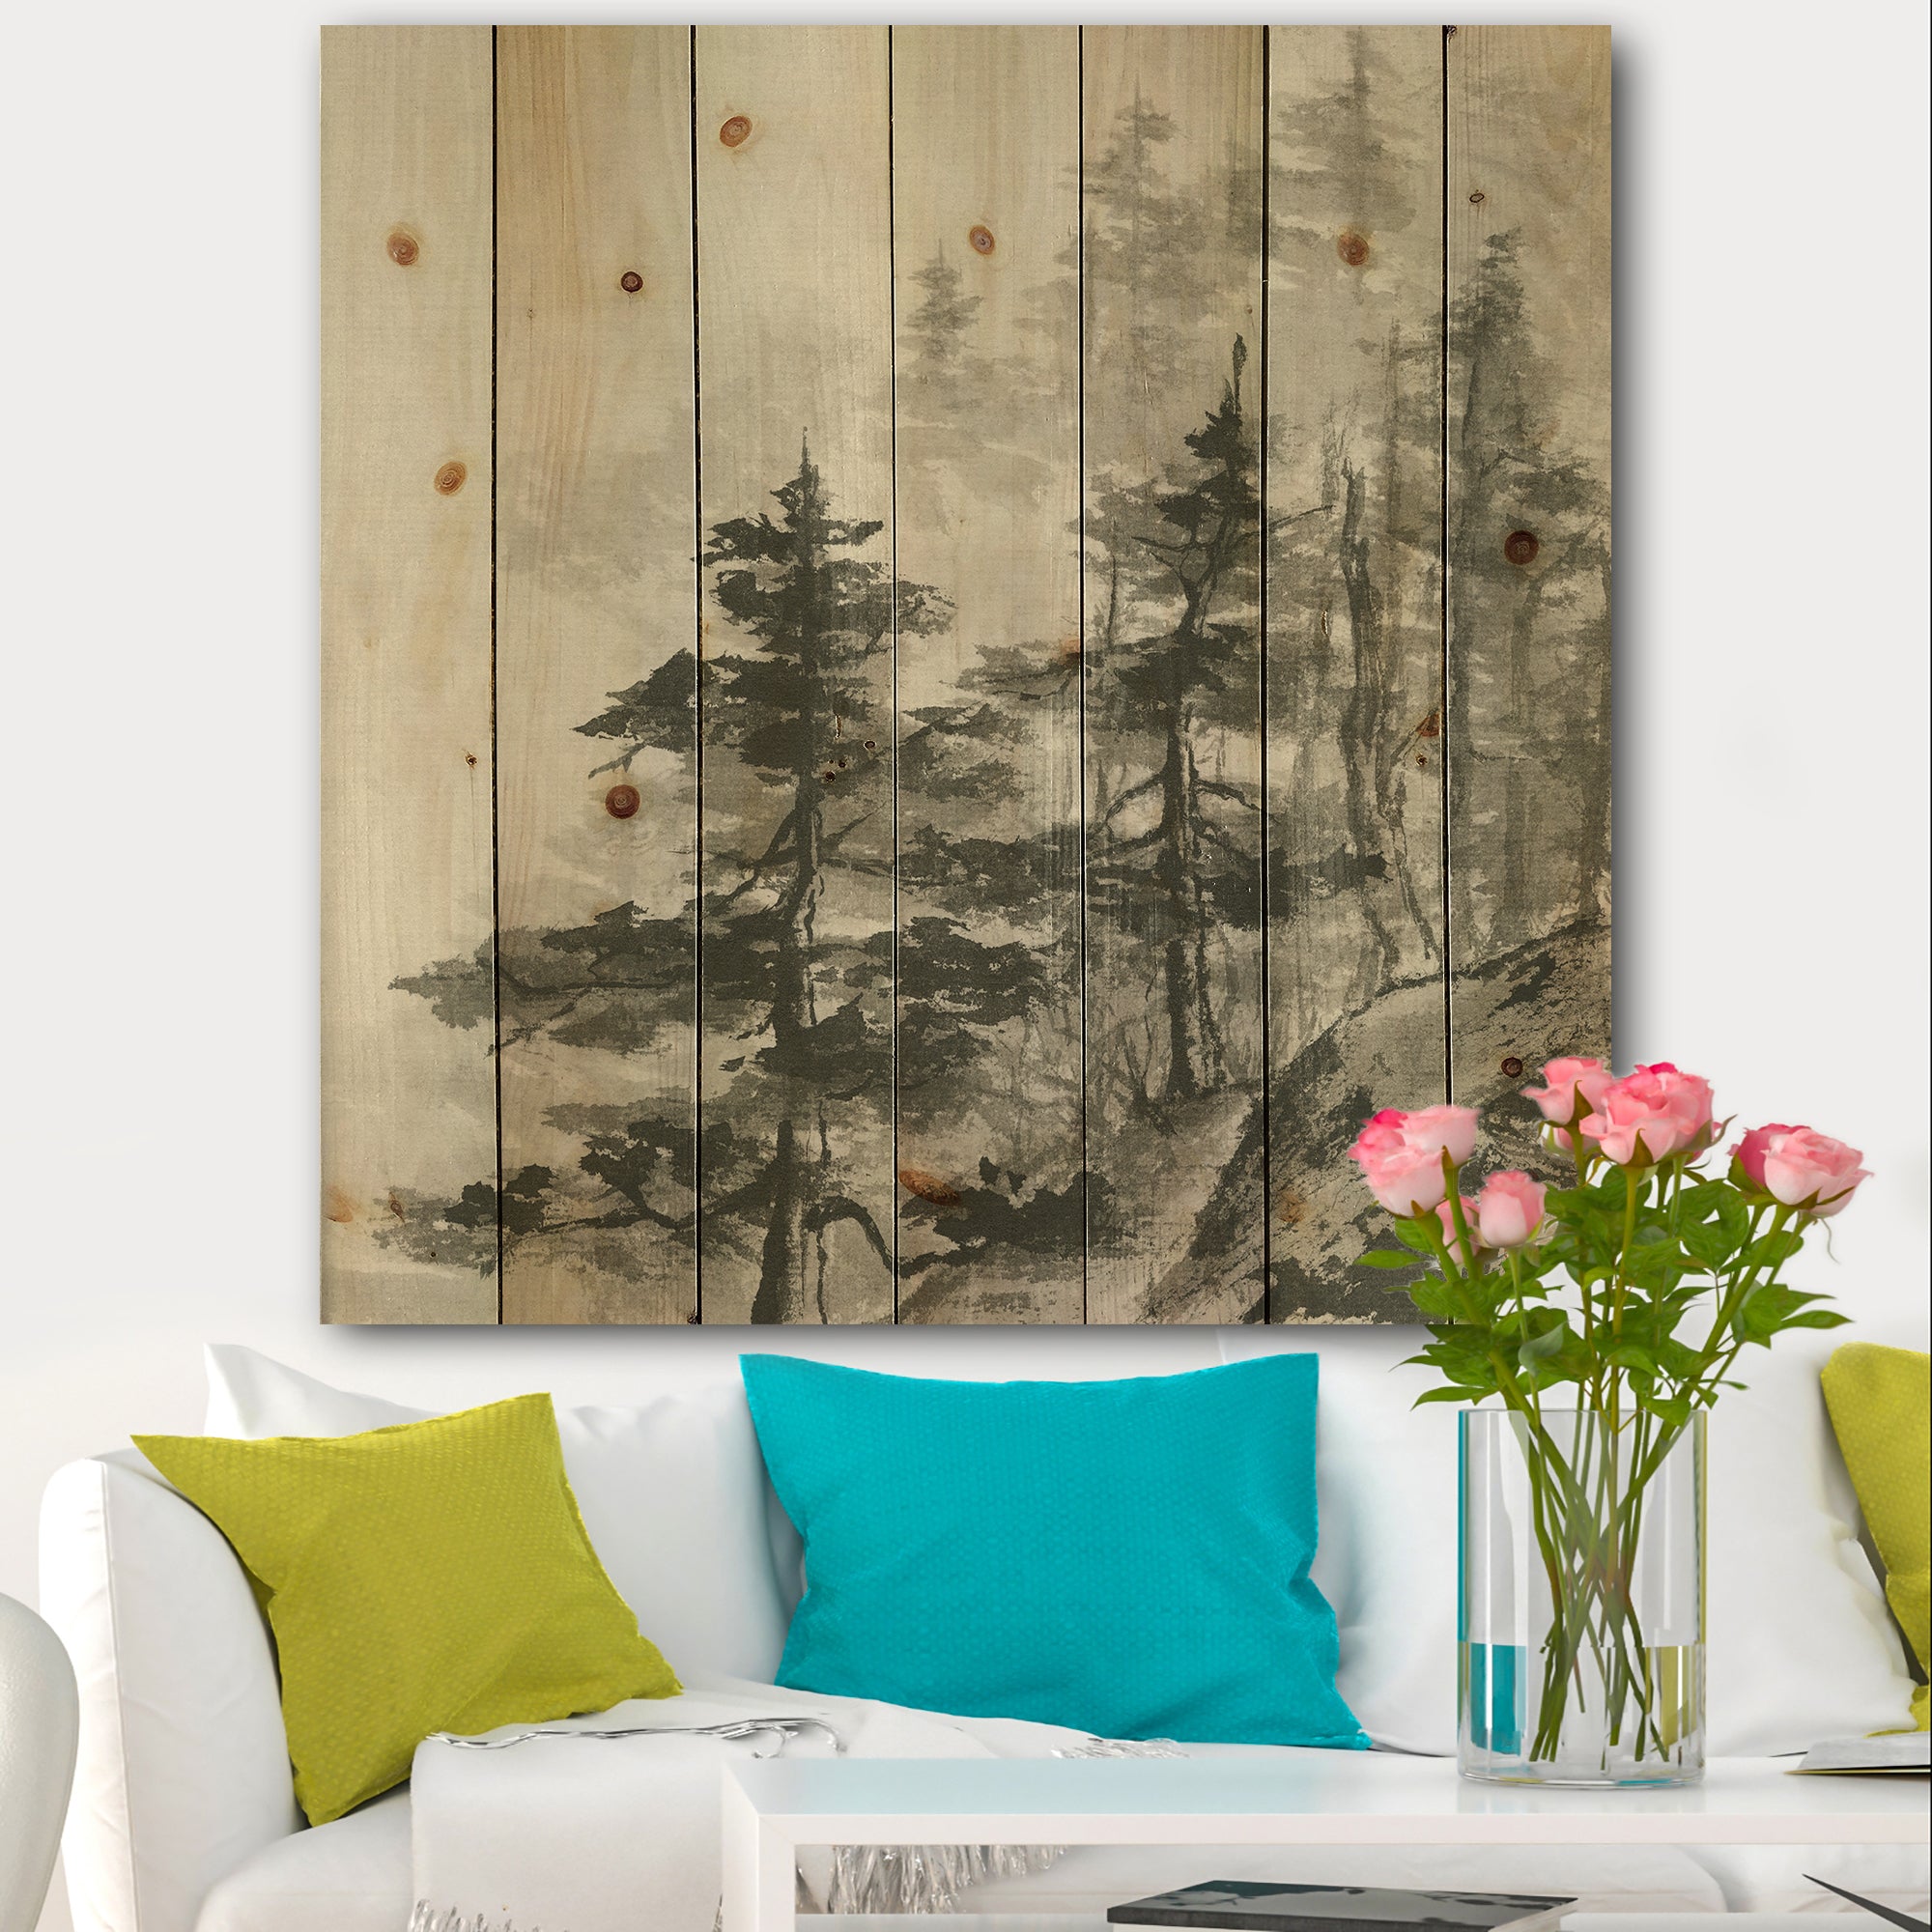 Asian Forest - Cabin & Lodge Print on Natural Pine Wood - 16x16